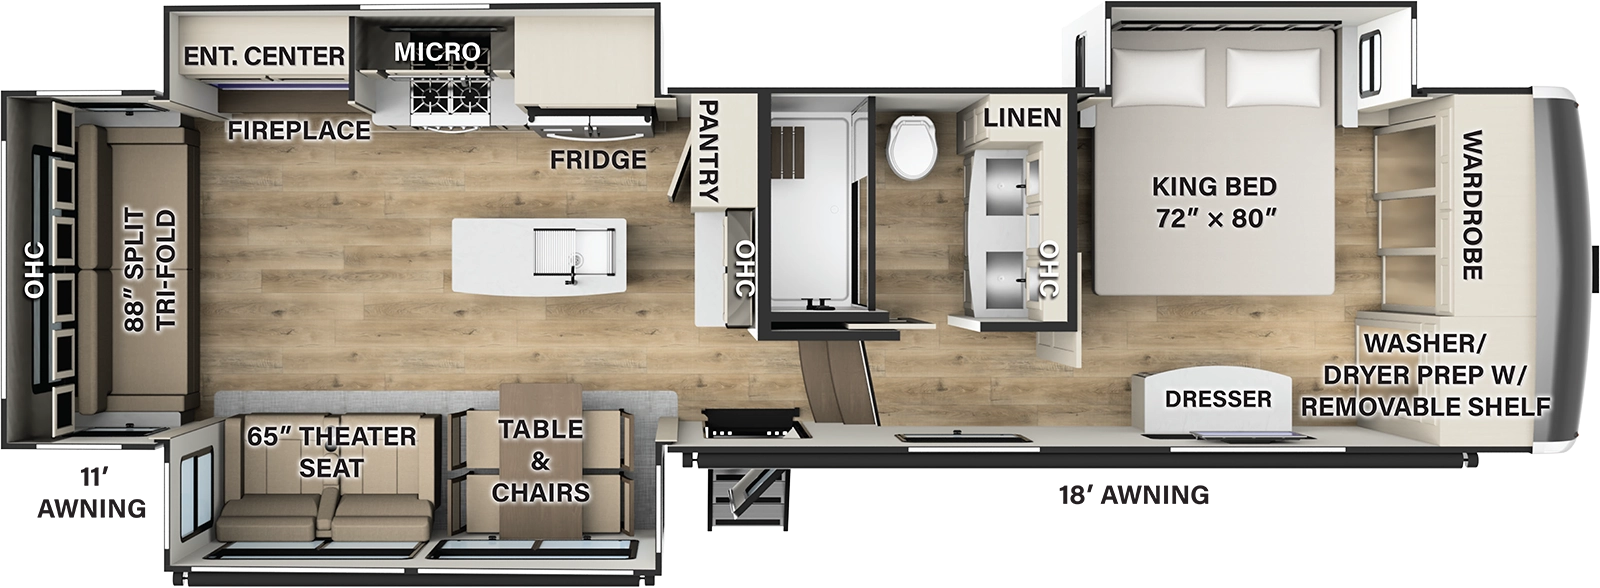 The 329DV has 3 slide outs, two on the road side and one on the camp side, along with one entry door on the camp side. Interior layout from front to back: front bedroom with king bed in the road side slide out; side aisle bathroom; kitchen living dining area with road side slide out containing cooktop and oven, overhead microwave, residential refrigerator, and TV entertainment area; the camp side slide containing freestanding table and chairs and theater seating; kitchen island with double basin sink. 